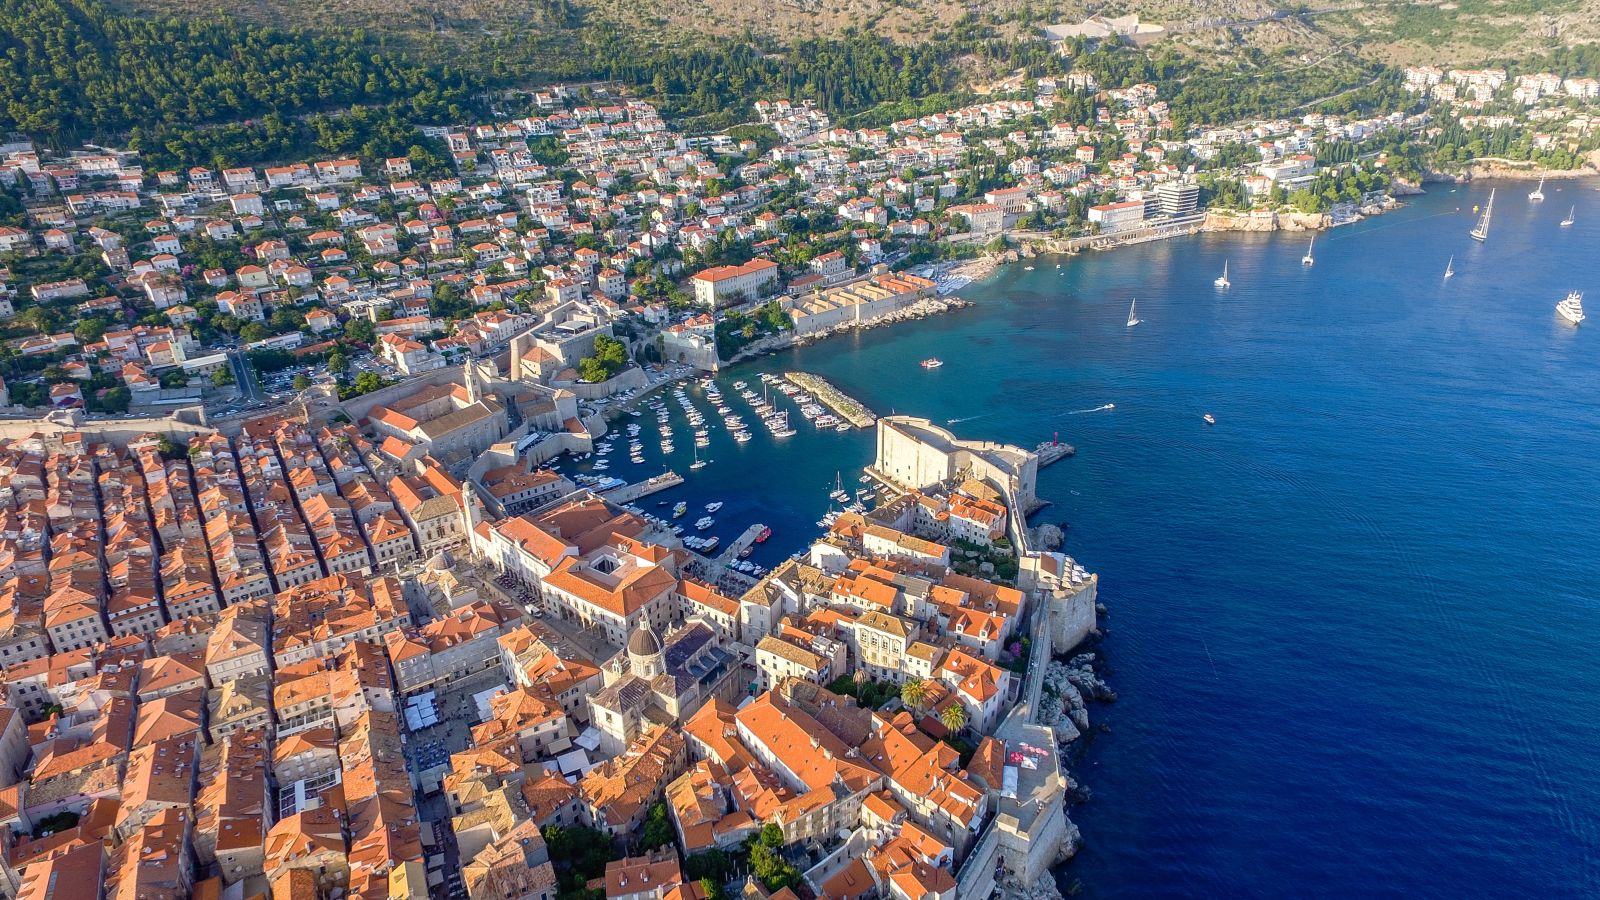 Aerial view of Dubrovnik old town and harbour in Croatia